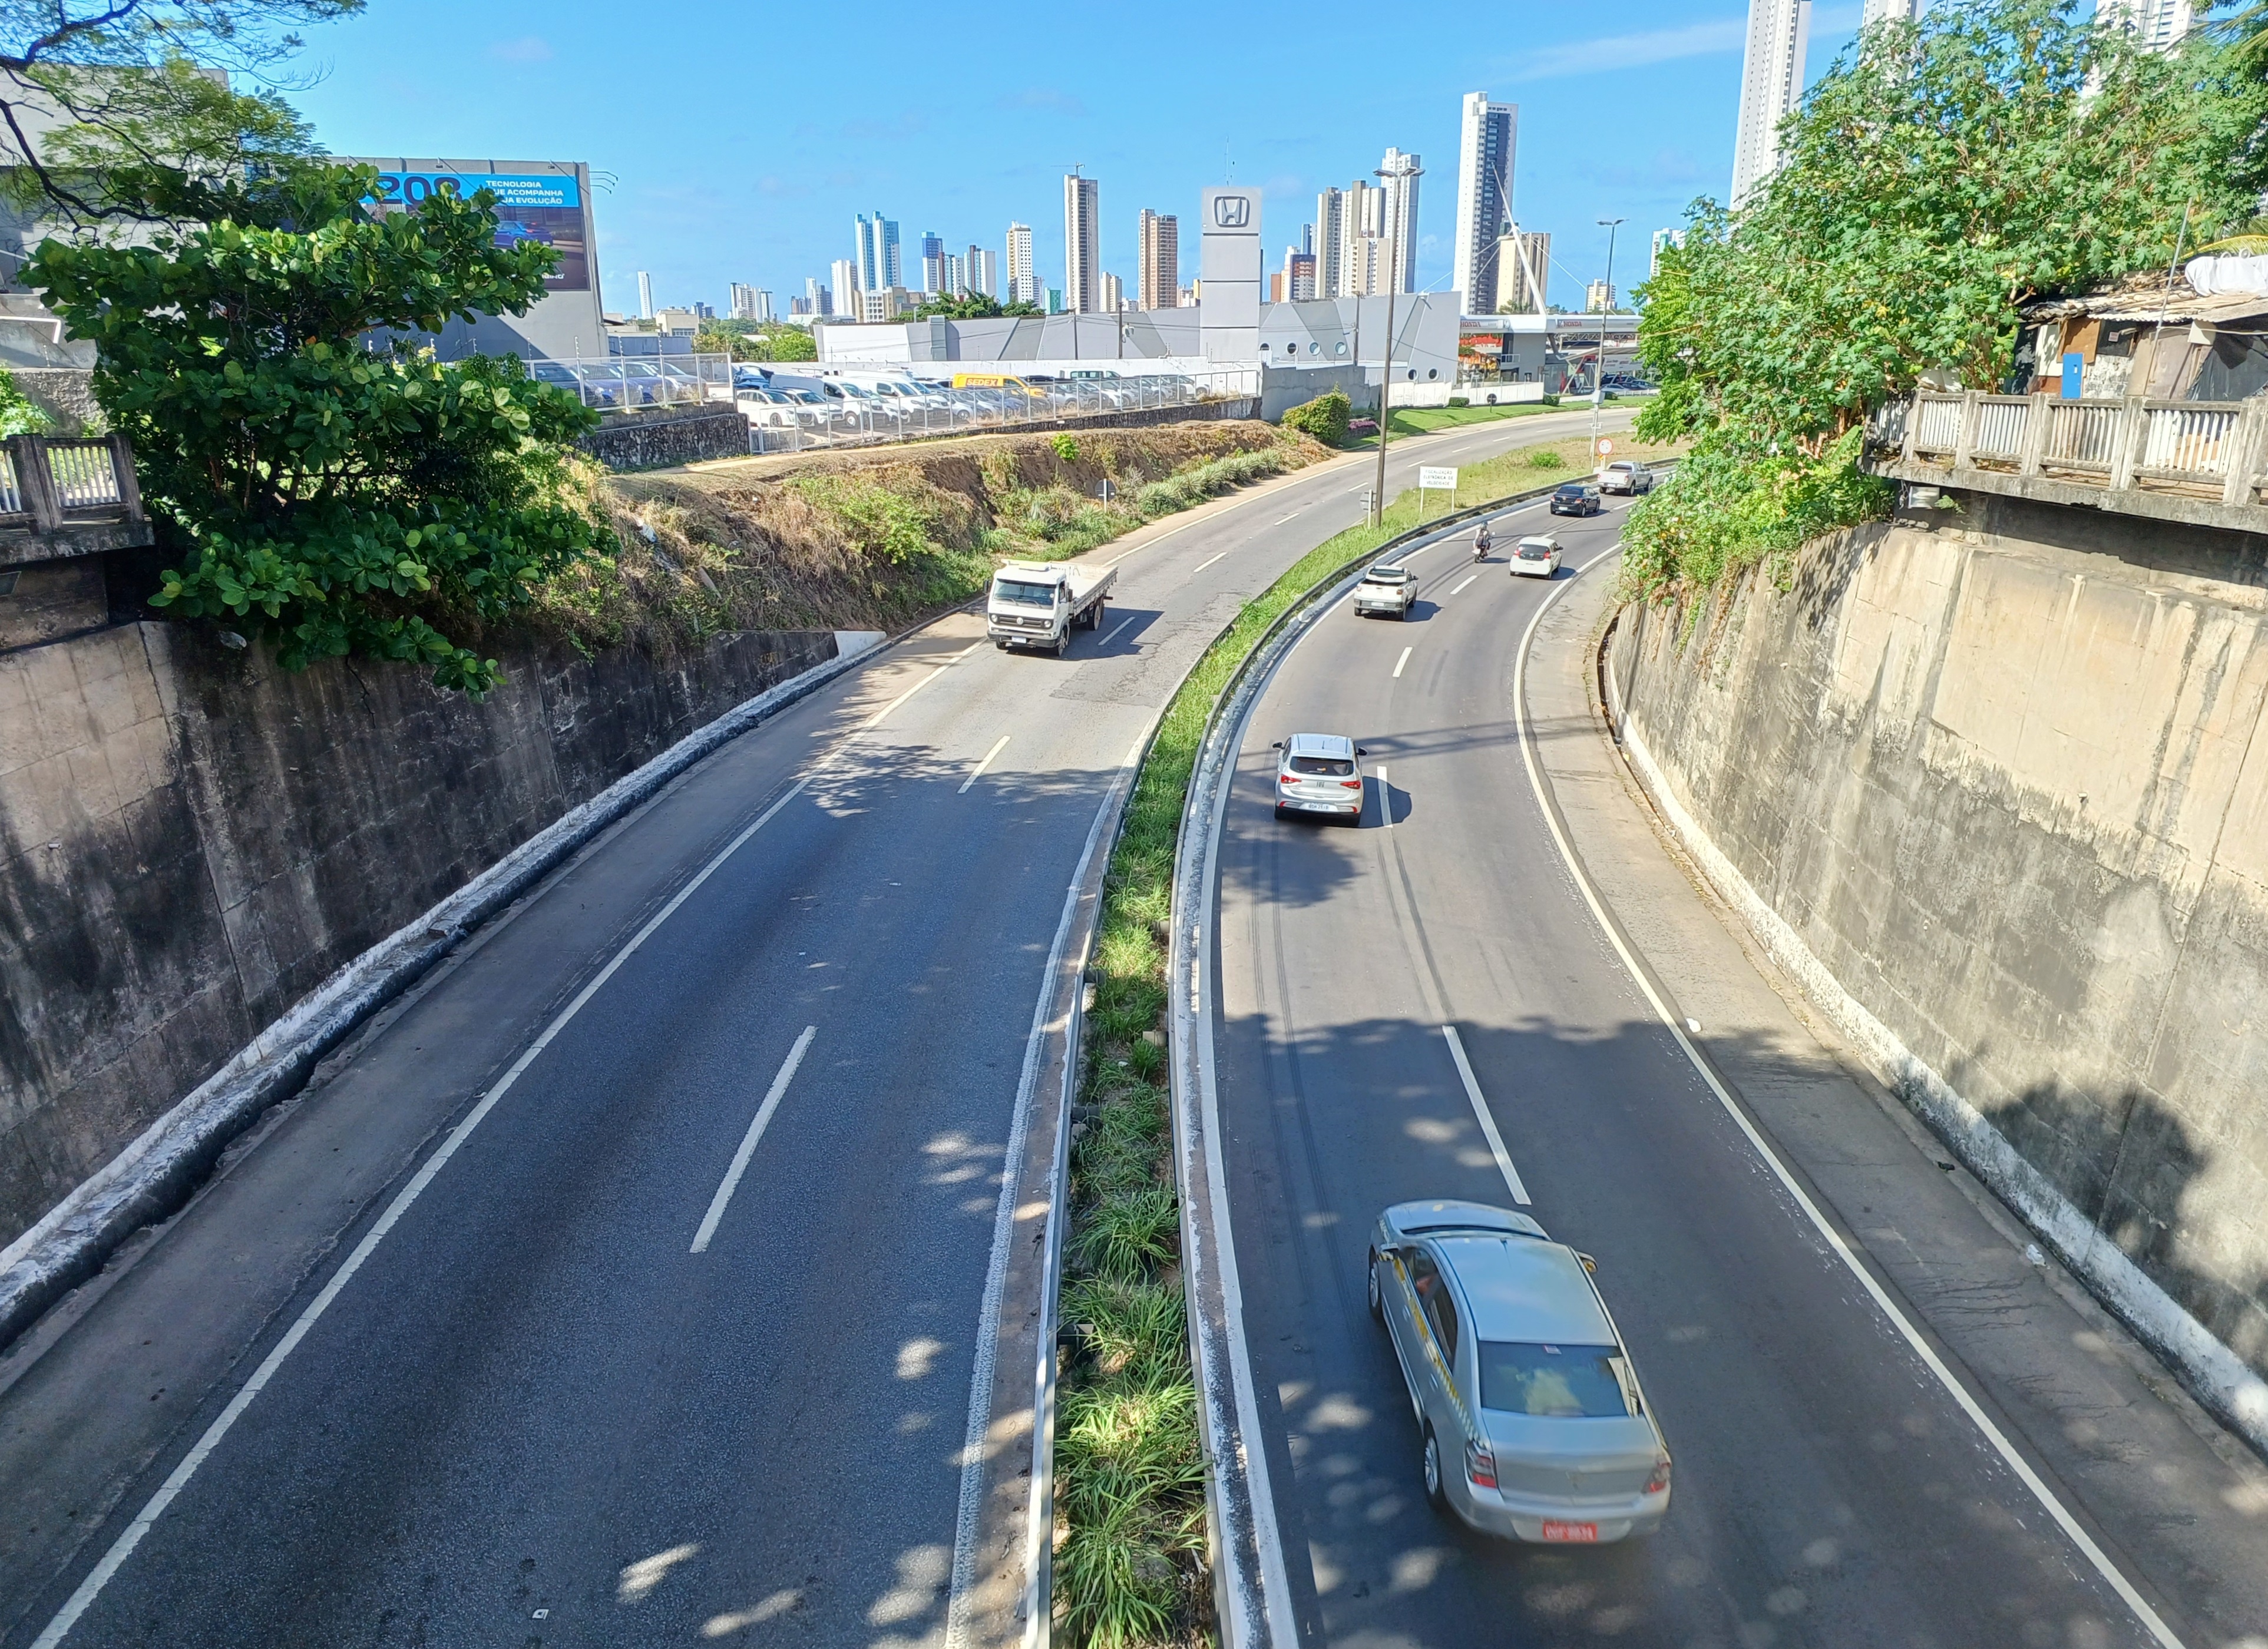 The federal highway BR-230 (the “Transamazônica”) was constructed in